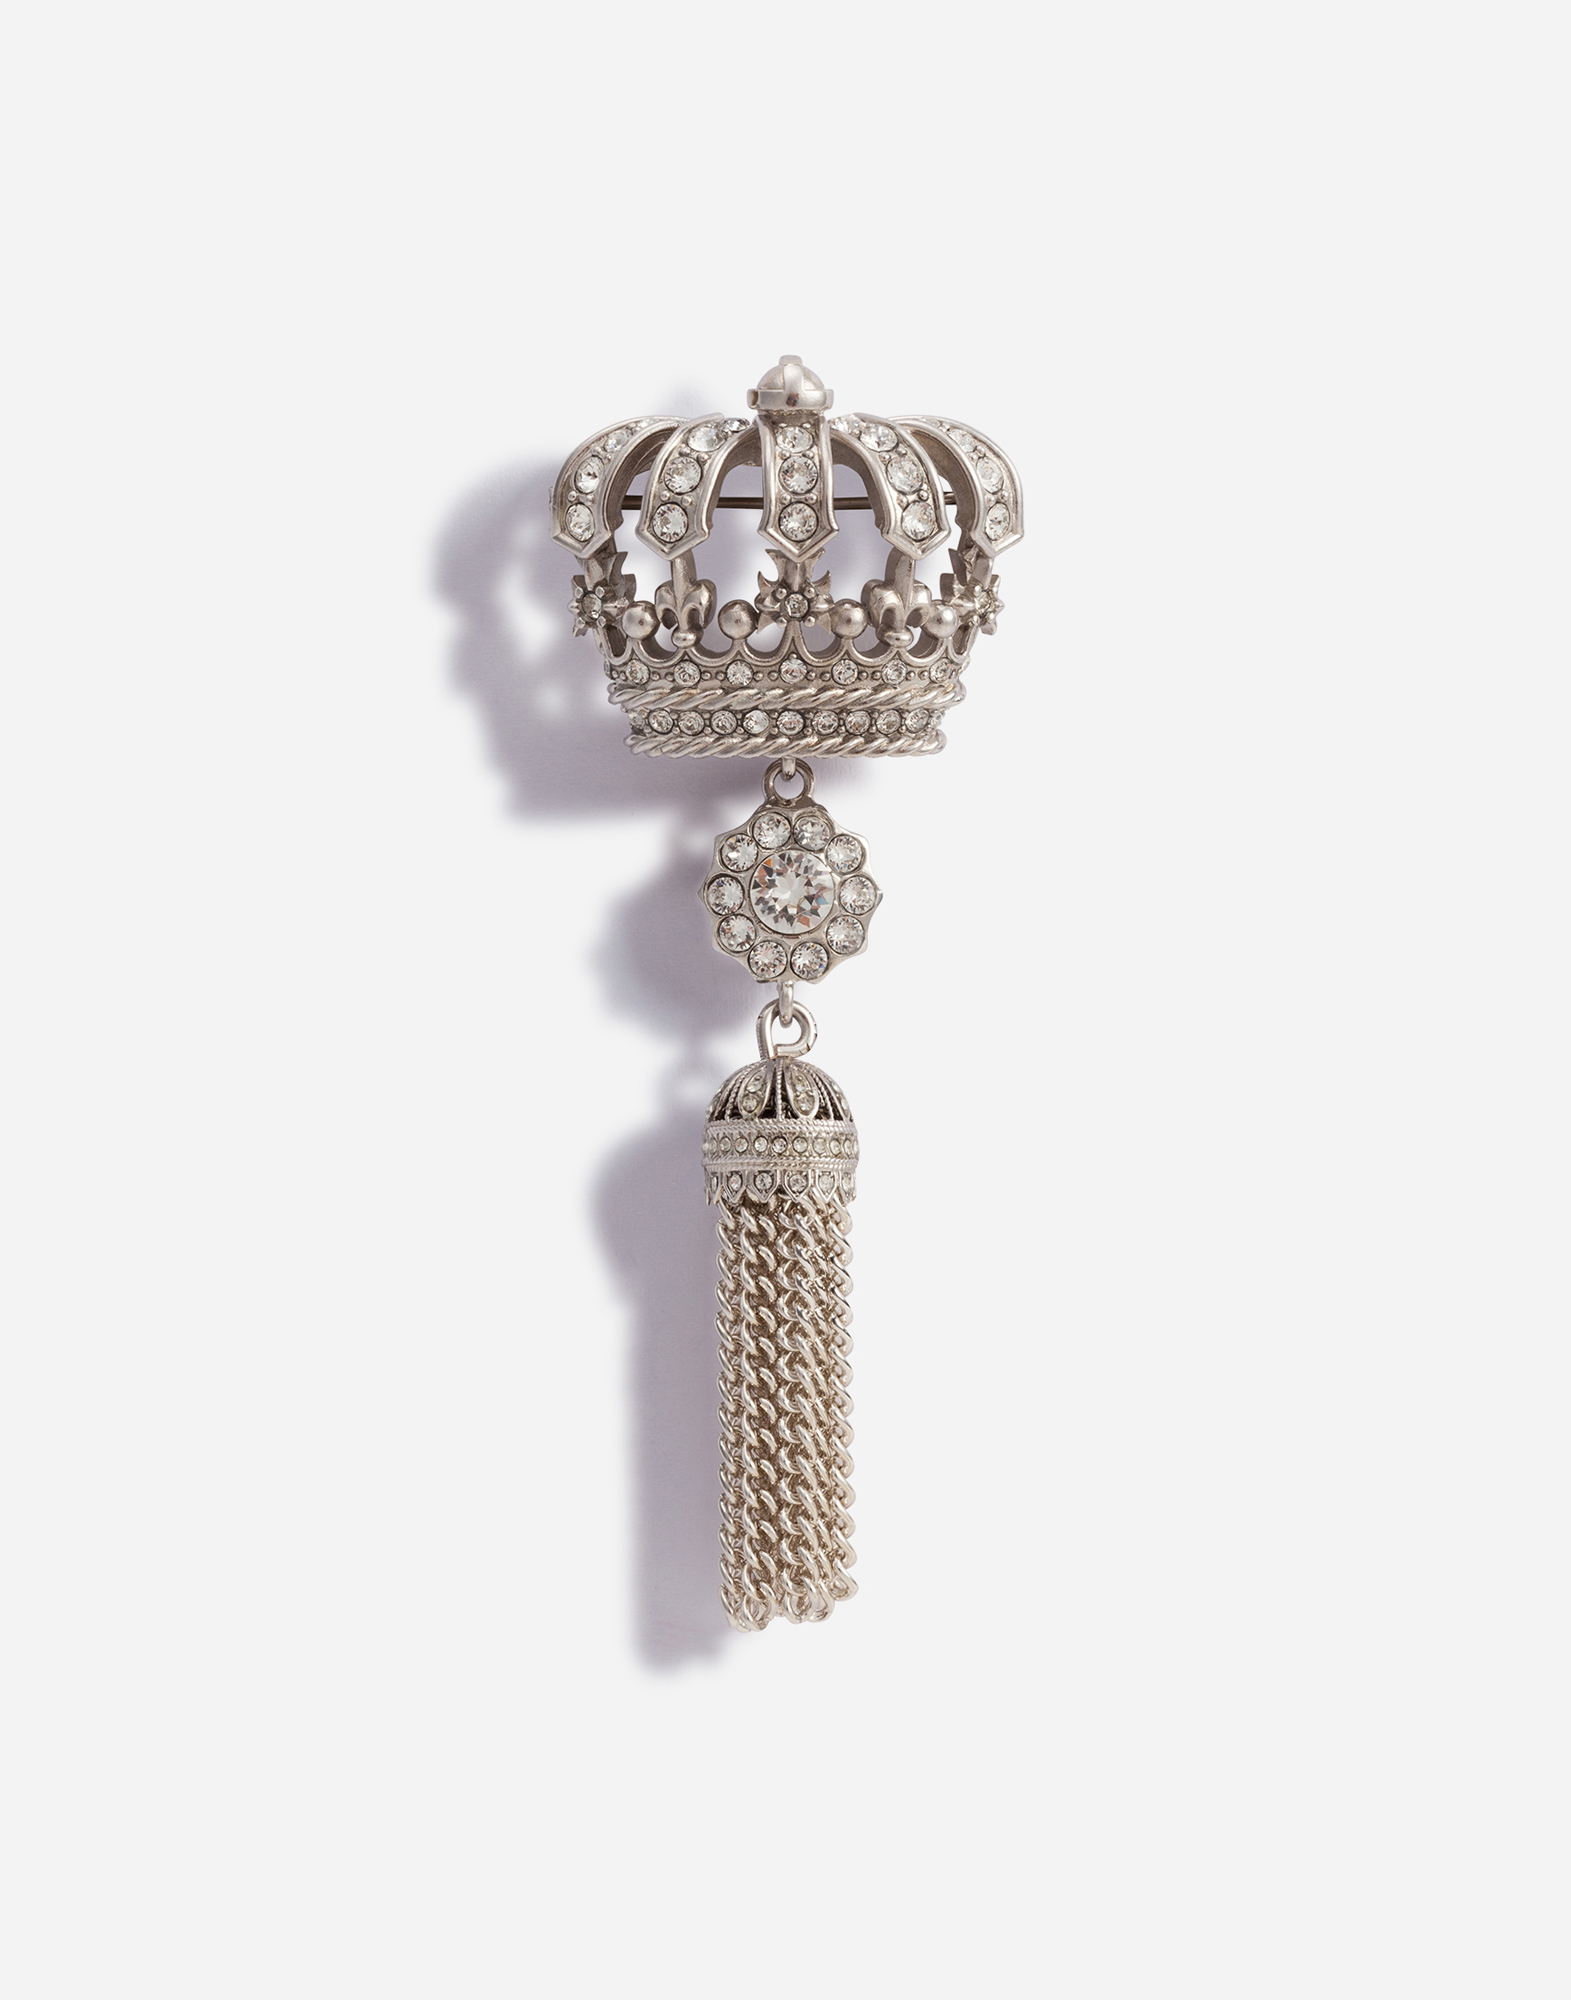 Brooch with crown and tassel in Silver